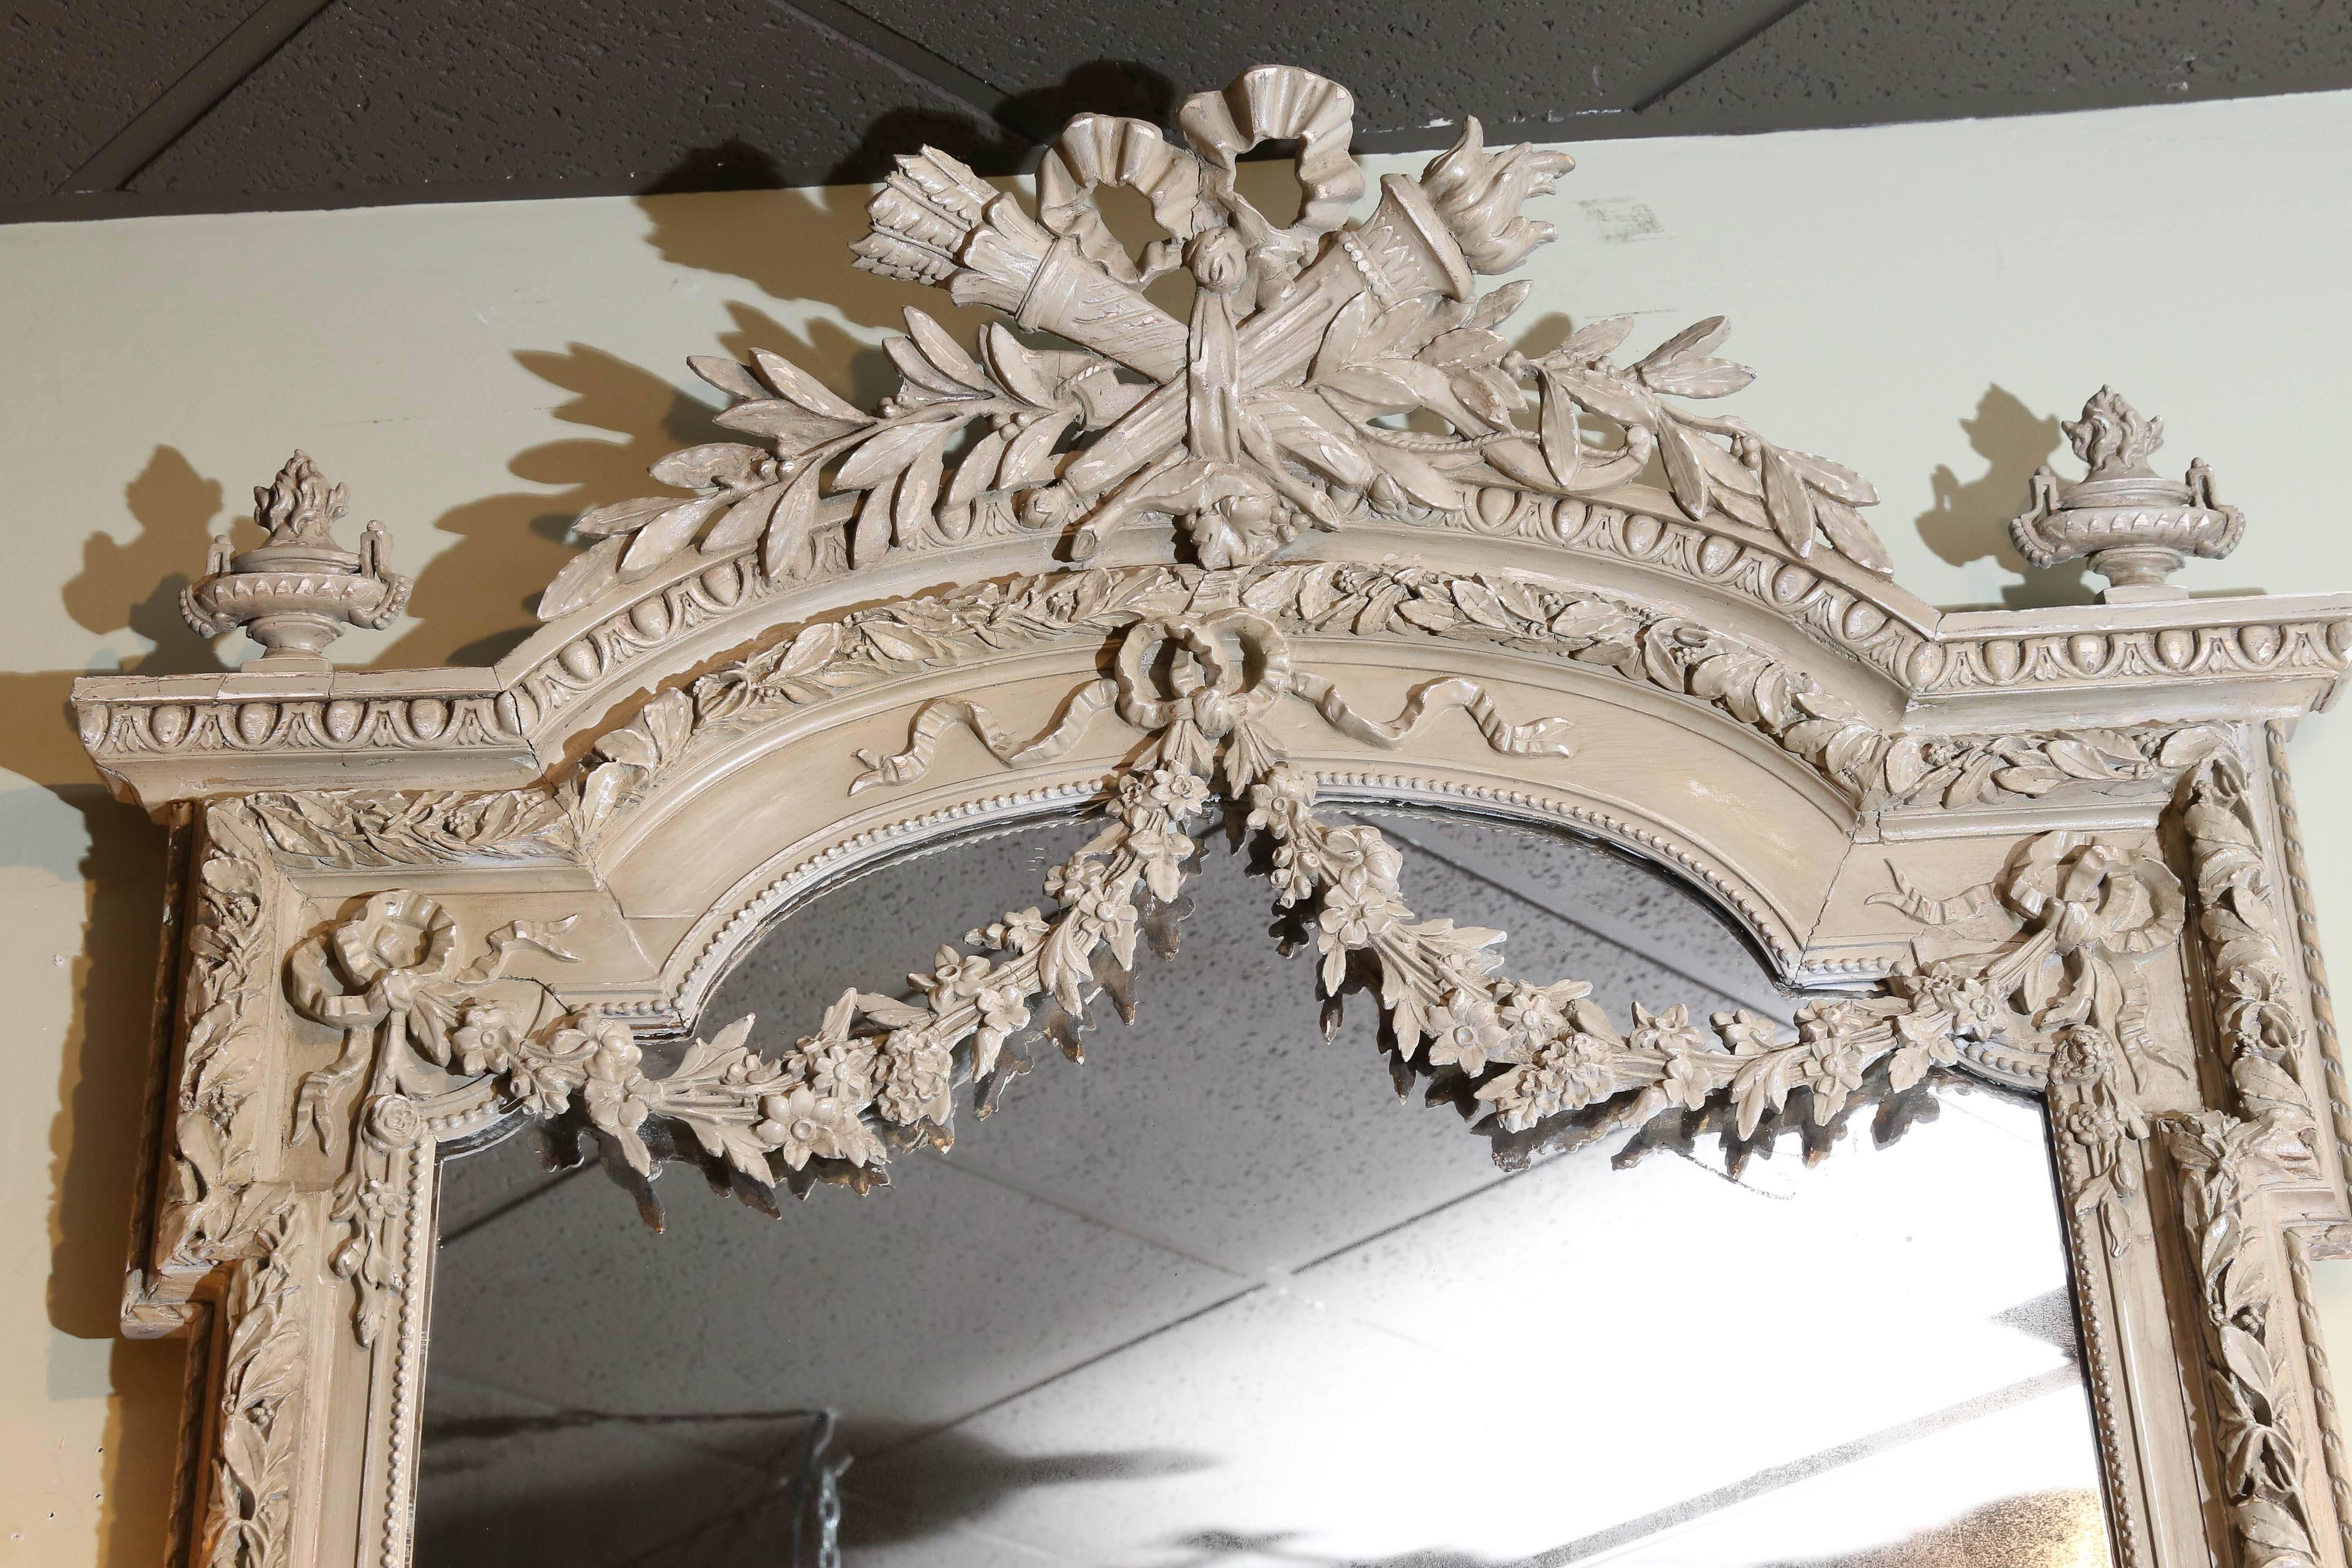 Lovely and beautiful grey painted mirror in the Louis XVI style with floral
and foliate draping at the upper portion of the mirror. Carved with foliate
designs down each side.